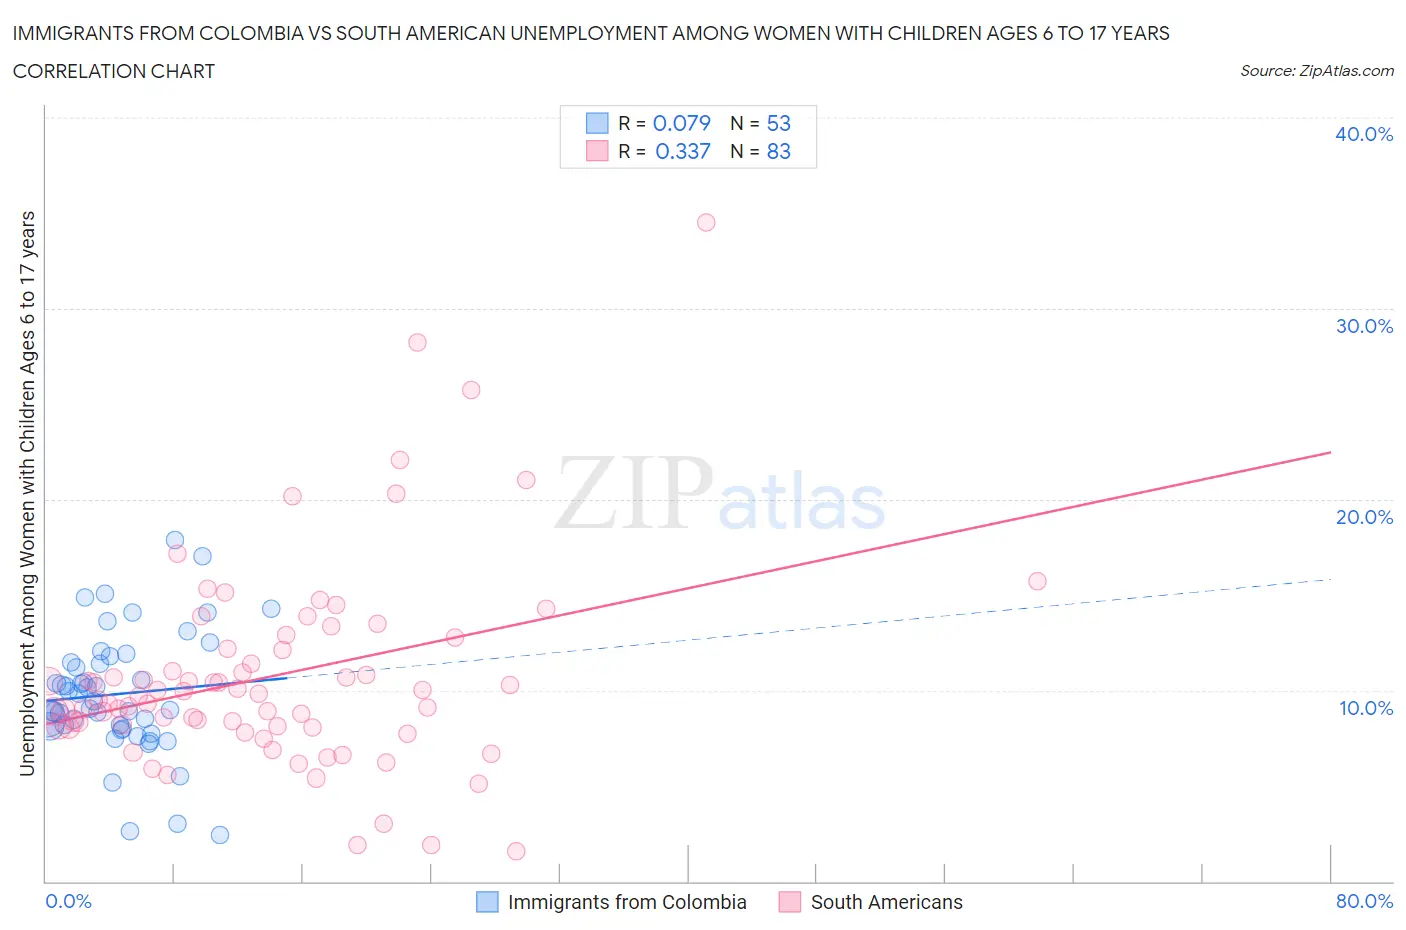 Immigrants from Colombia vs South American Unemployment Among Women with Children Ages 6 to 17 years